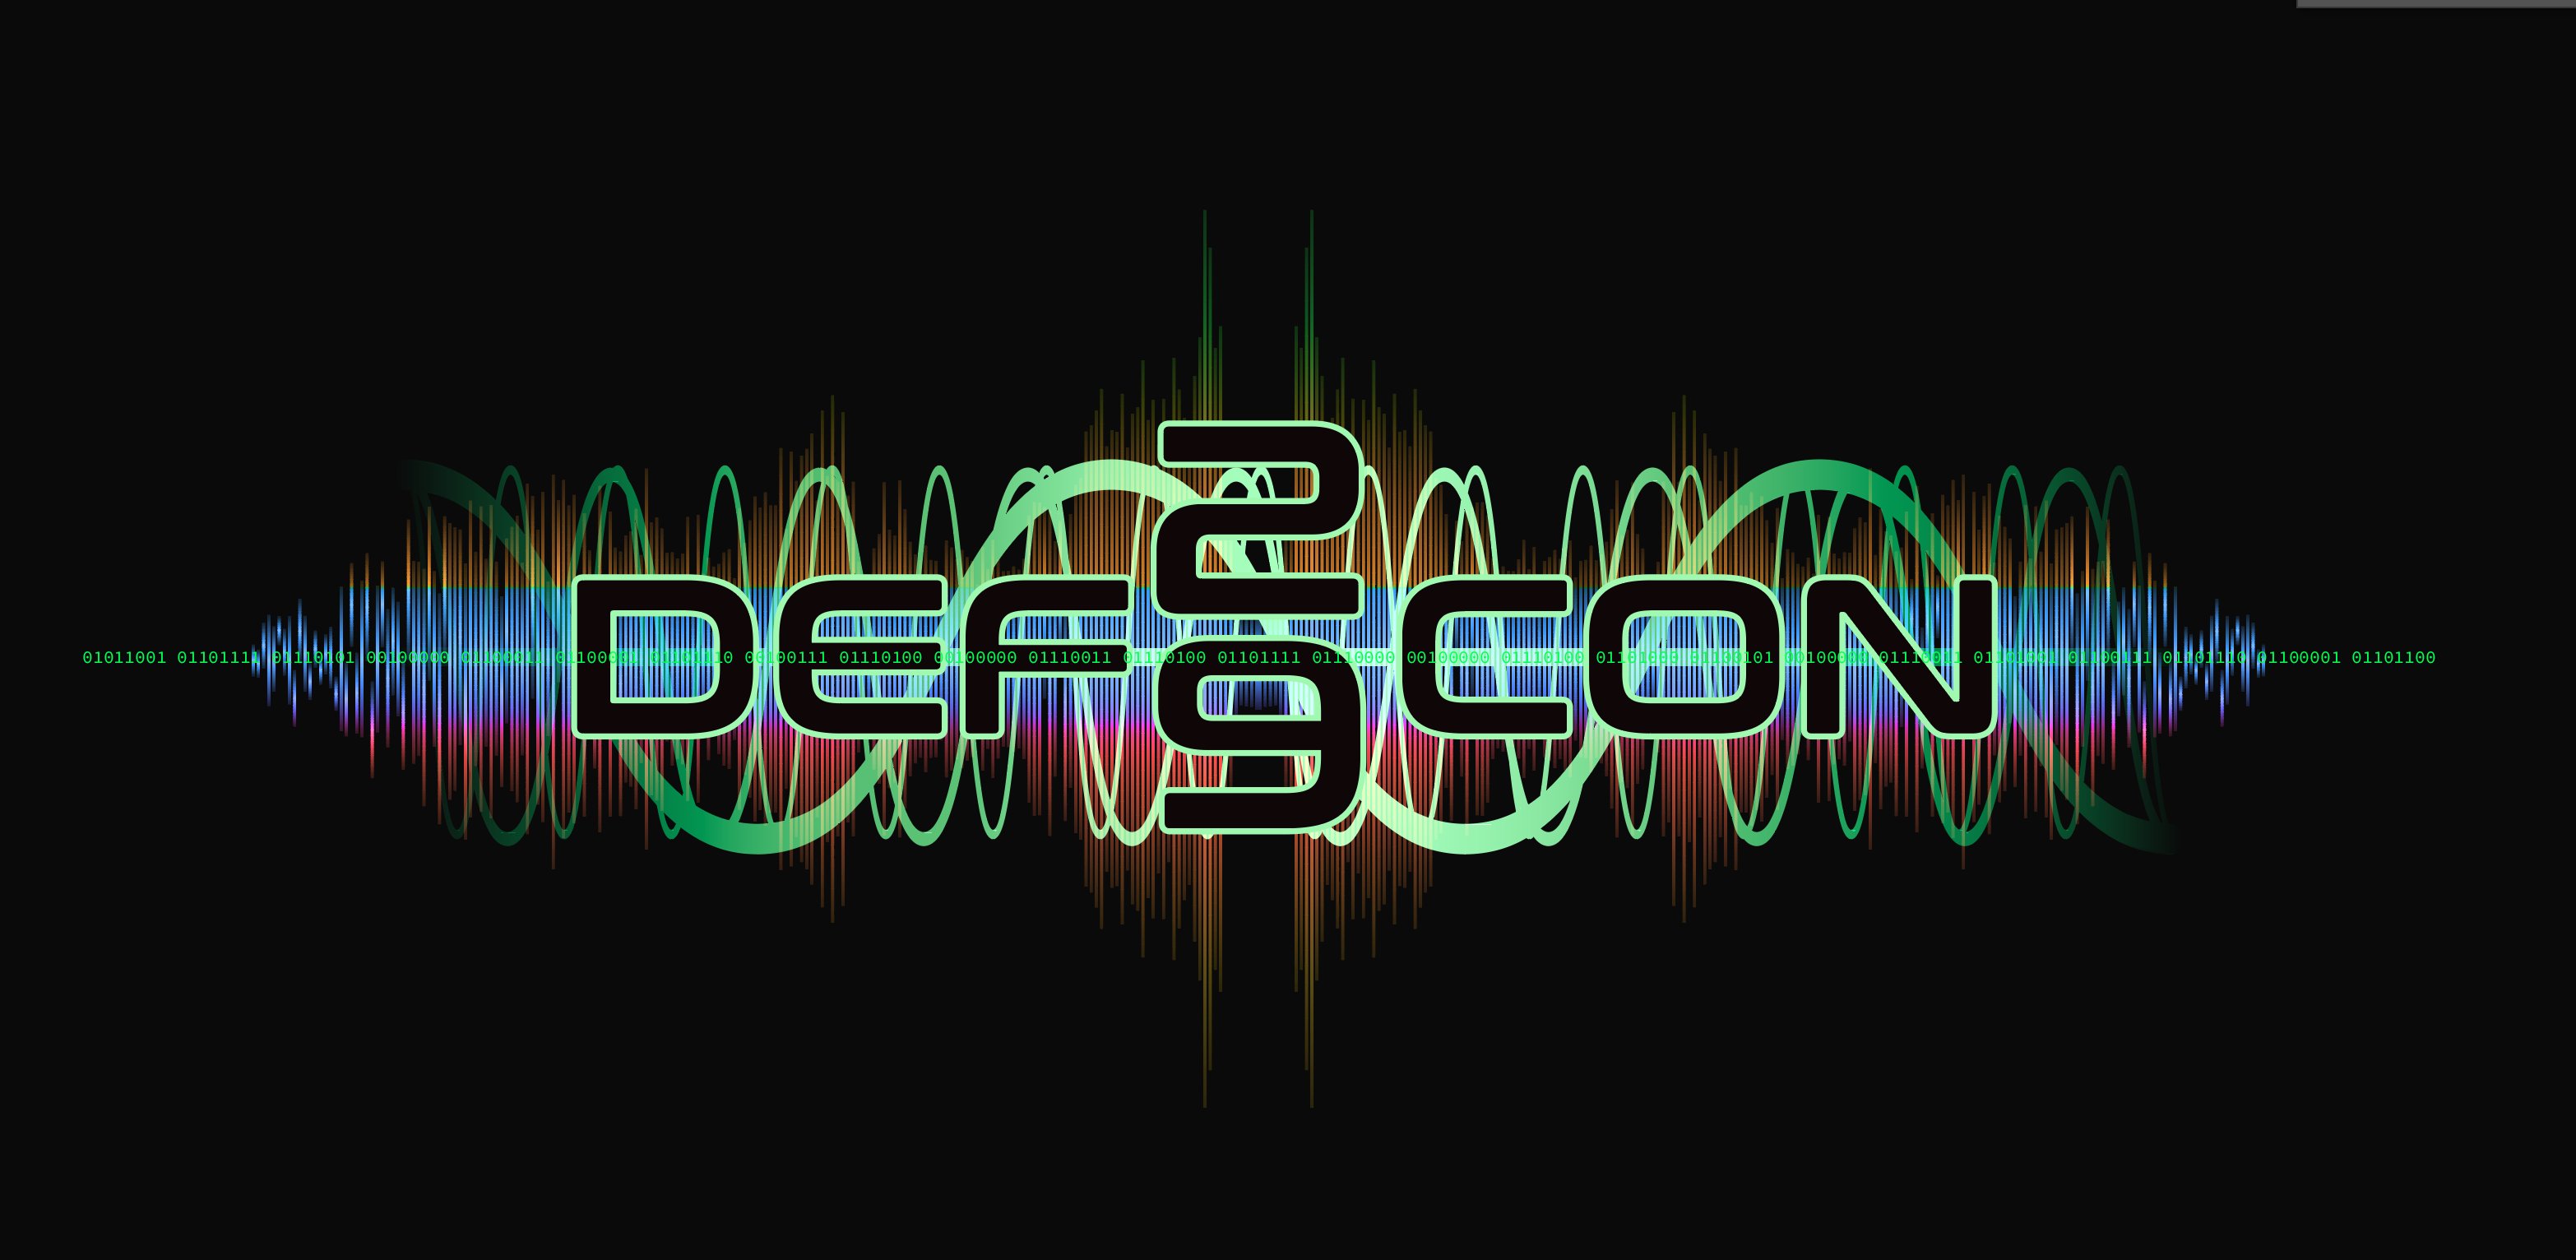 Def Con It S Official Def Con Season Has Arrived And It S Time To Announce The Theme The Theme For Def Con 29 Is Imagine A Drum Roll Here You Can T